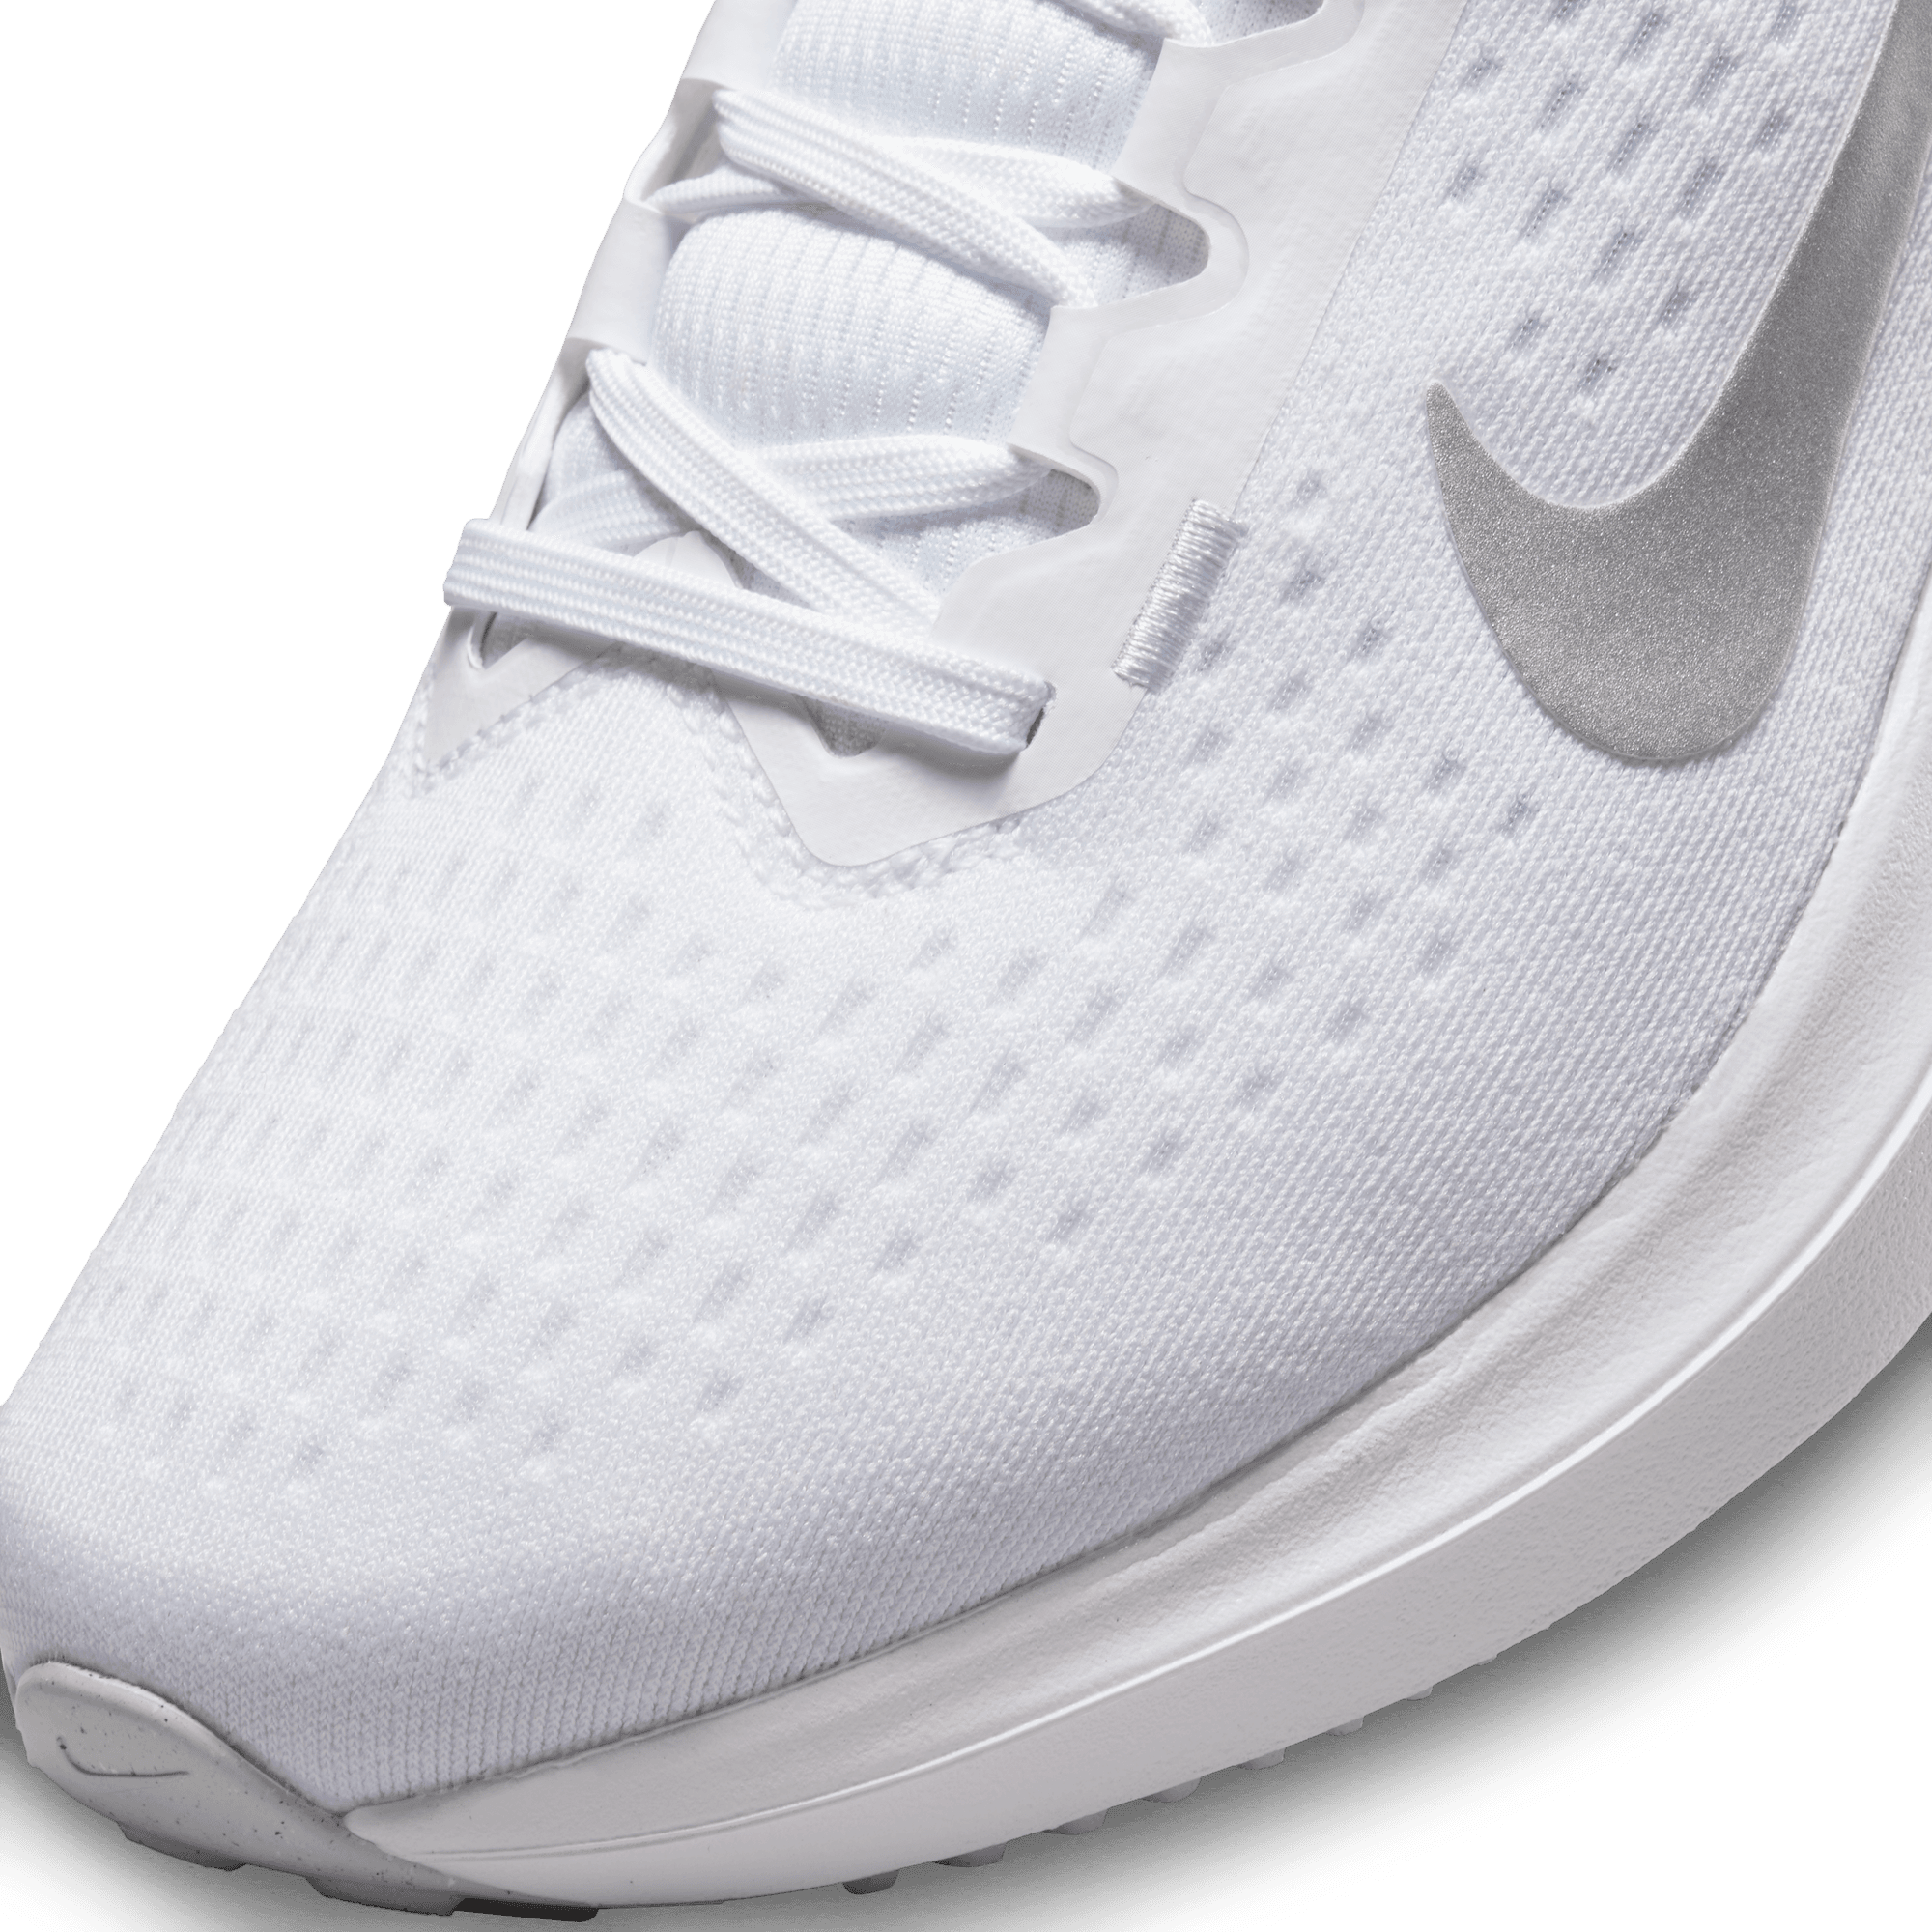 NIKE WINFLO 10 WOMEN'S ROAD RUNNING SHOES – Park Access